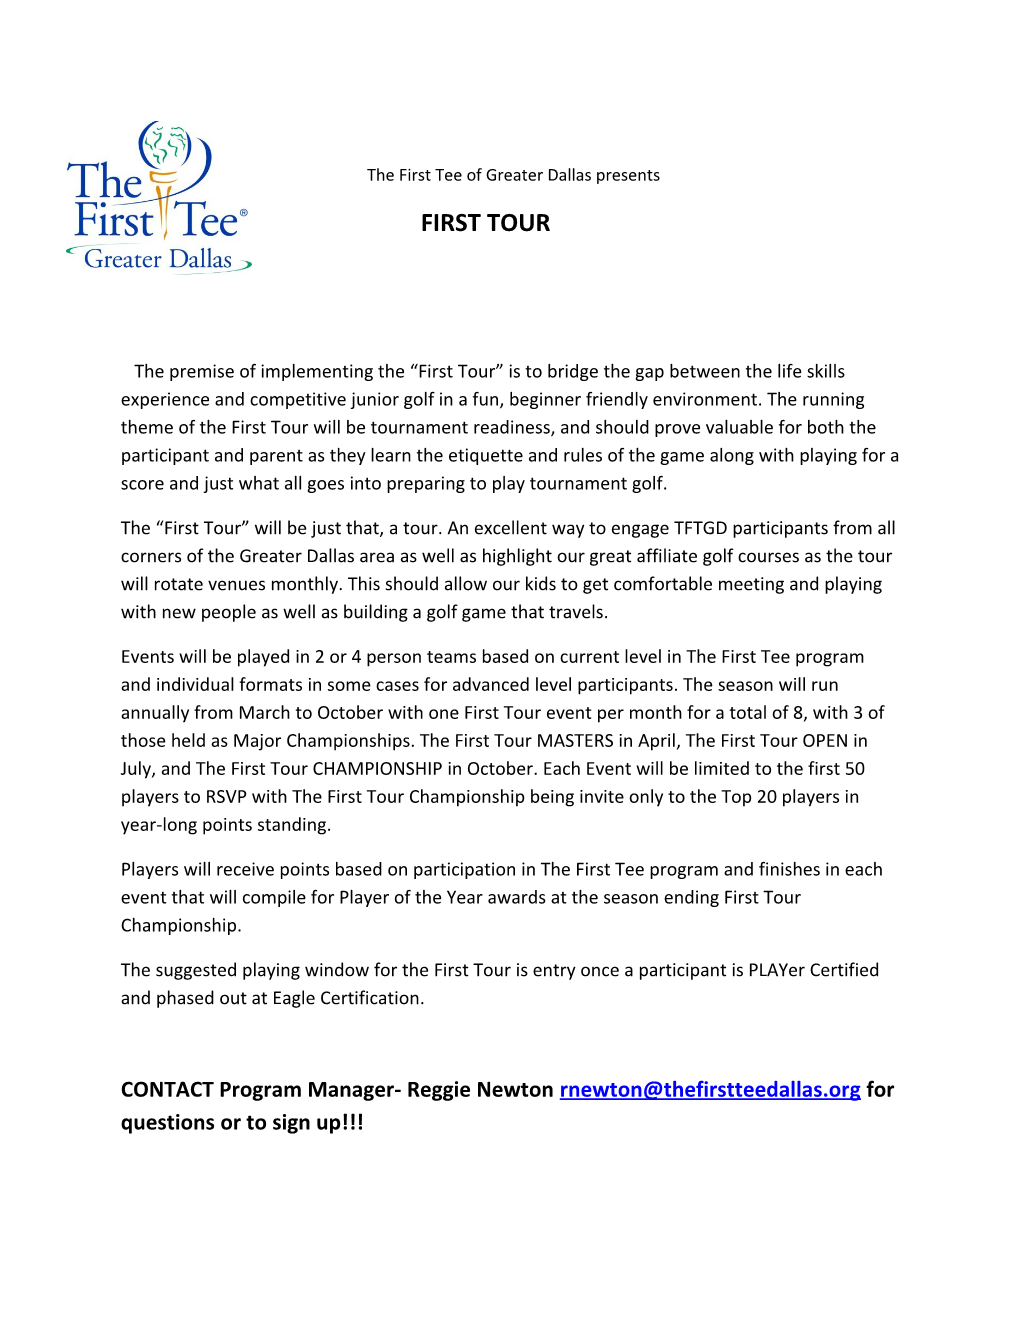 The First Tee of Greater Dallas Presents